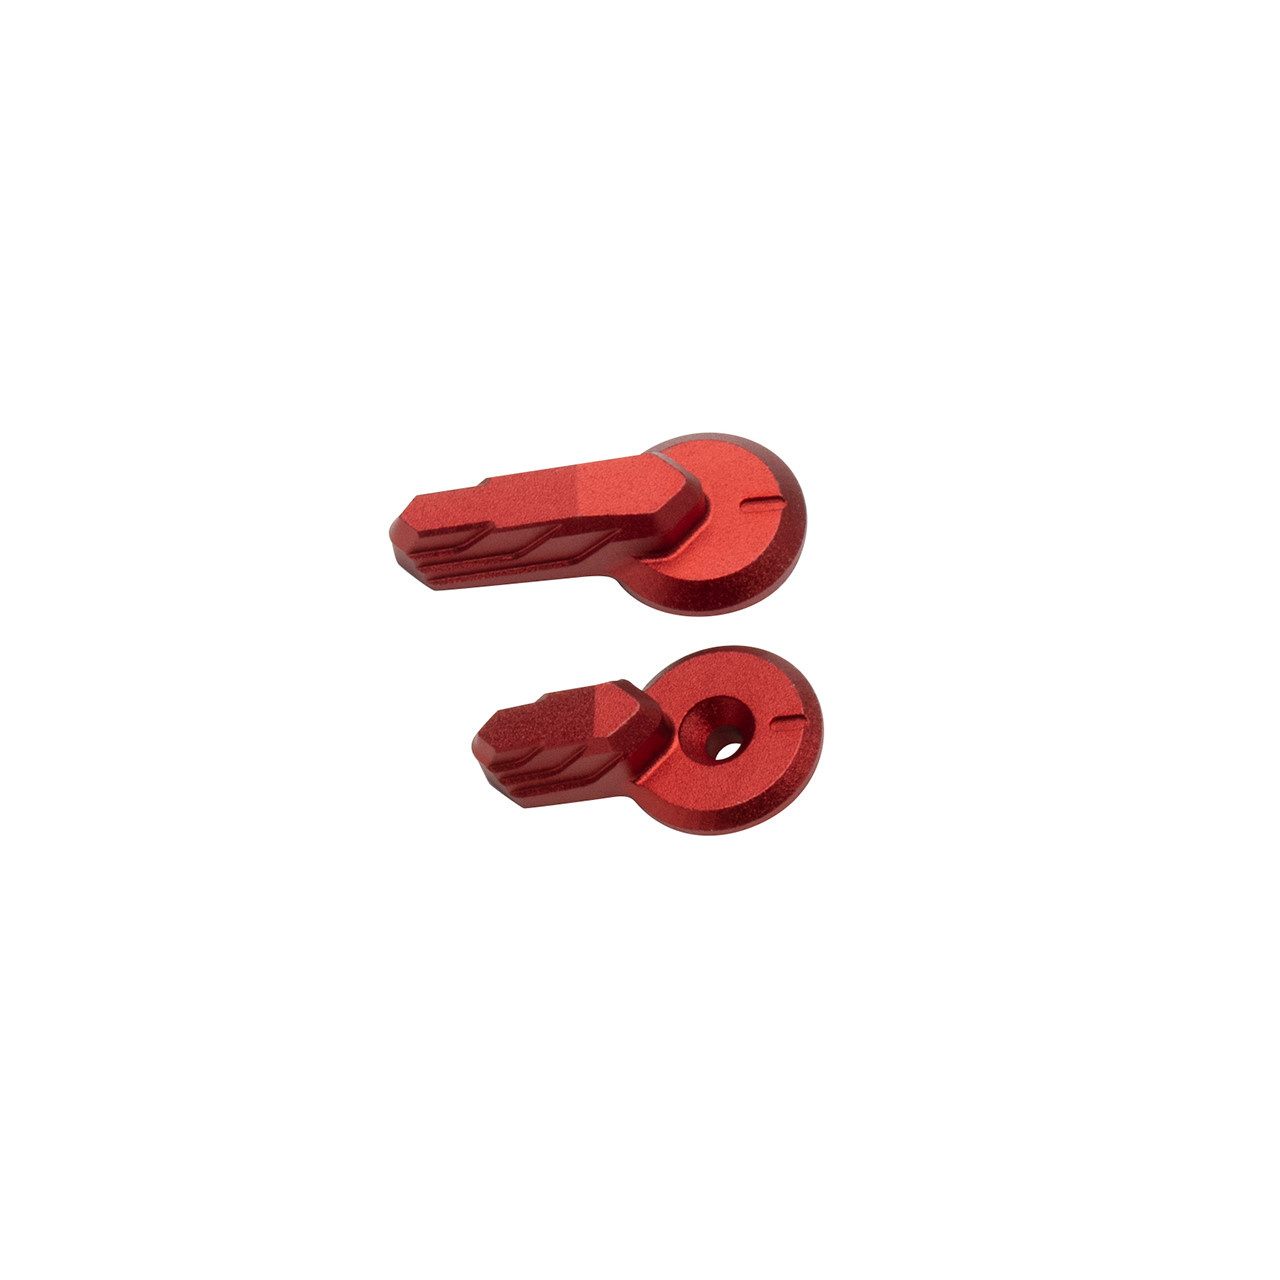 Krytac Krytac Ambi Selector Switch Assembly CNC / Anodized Red